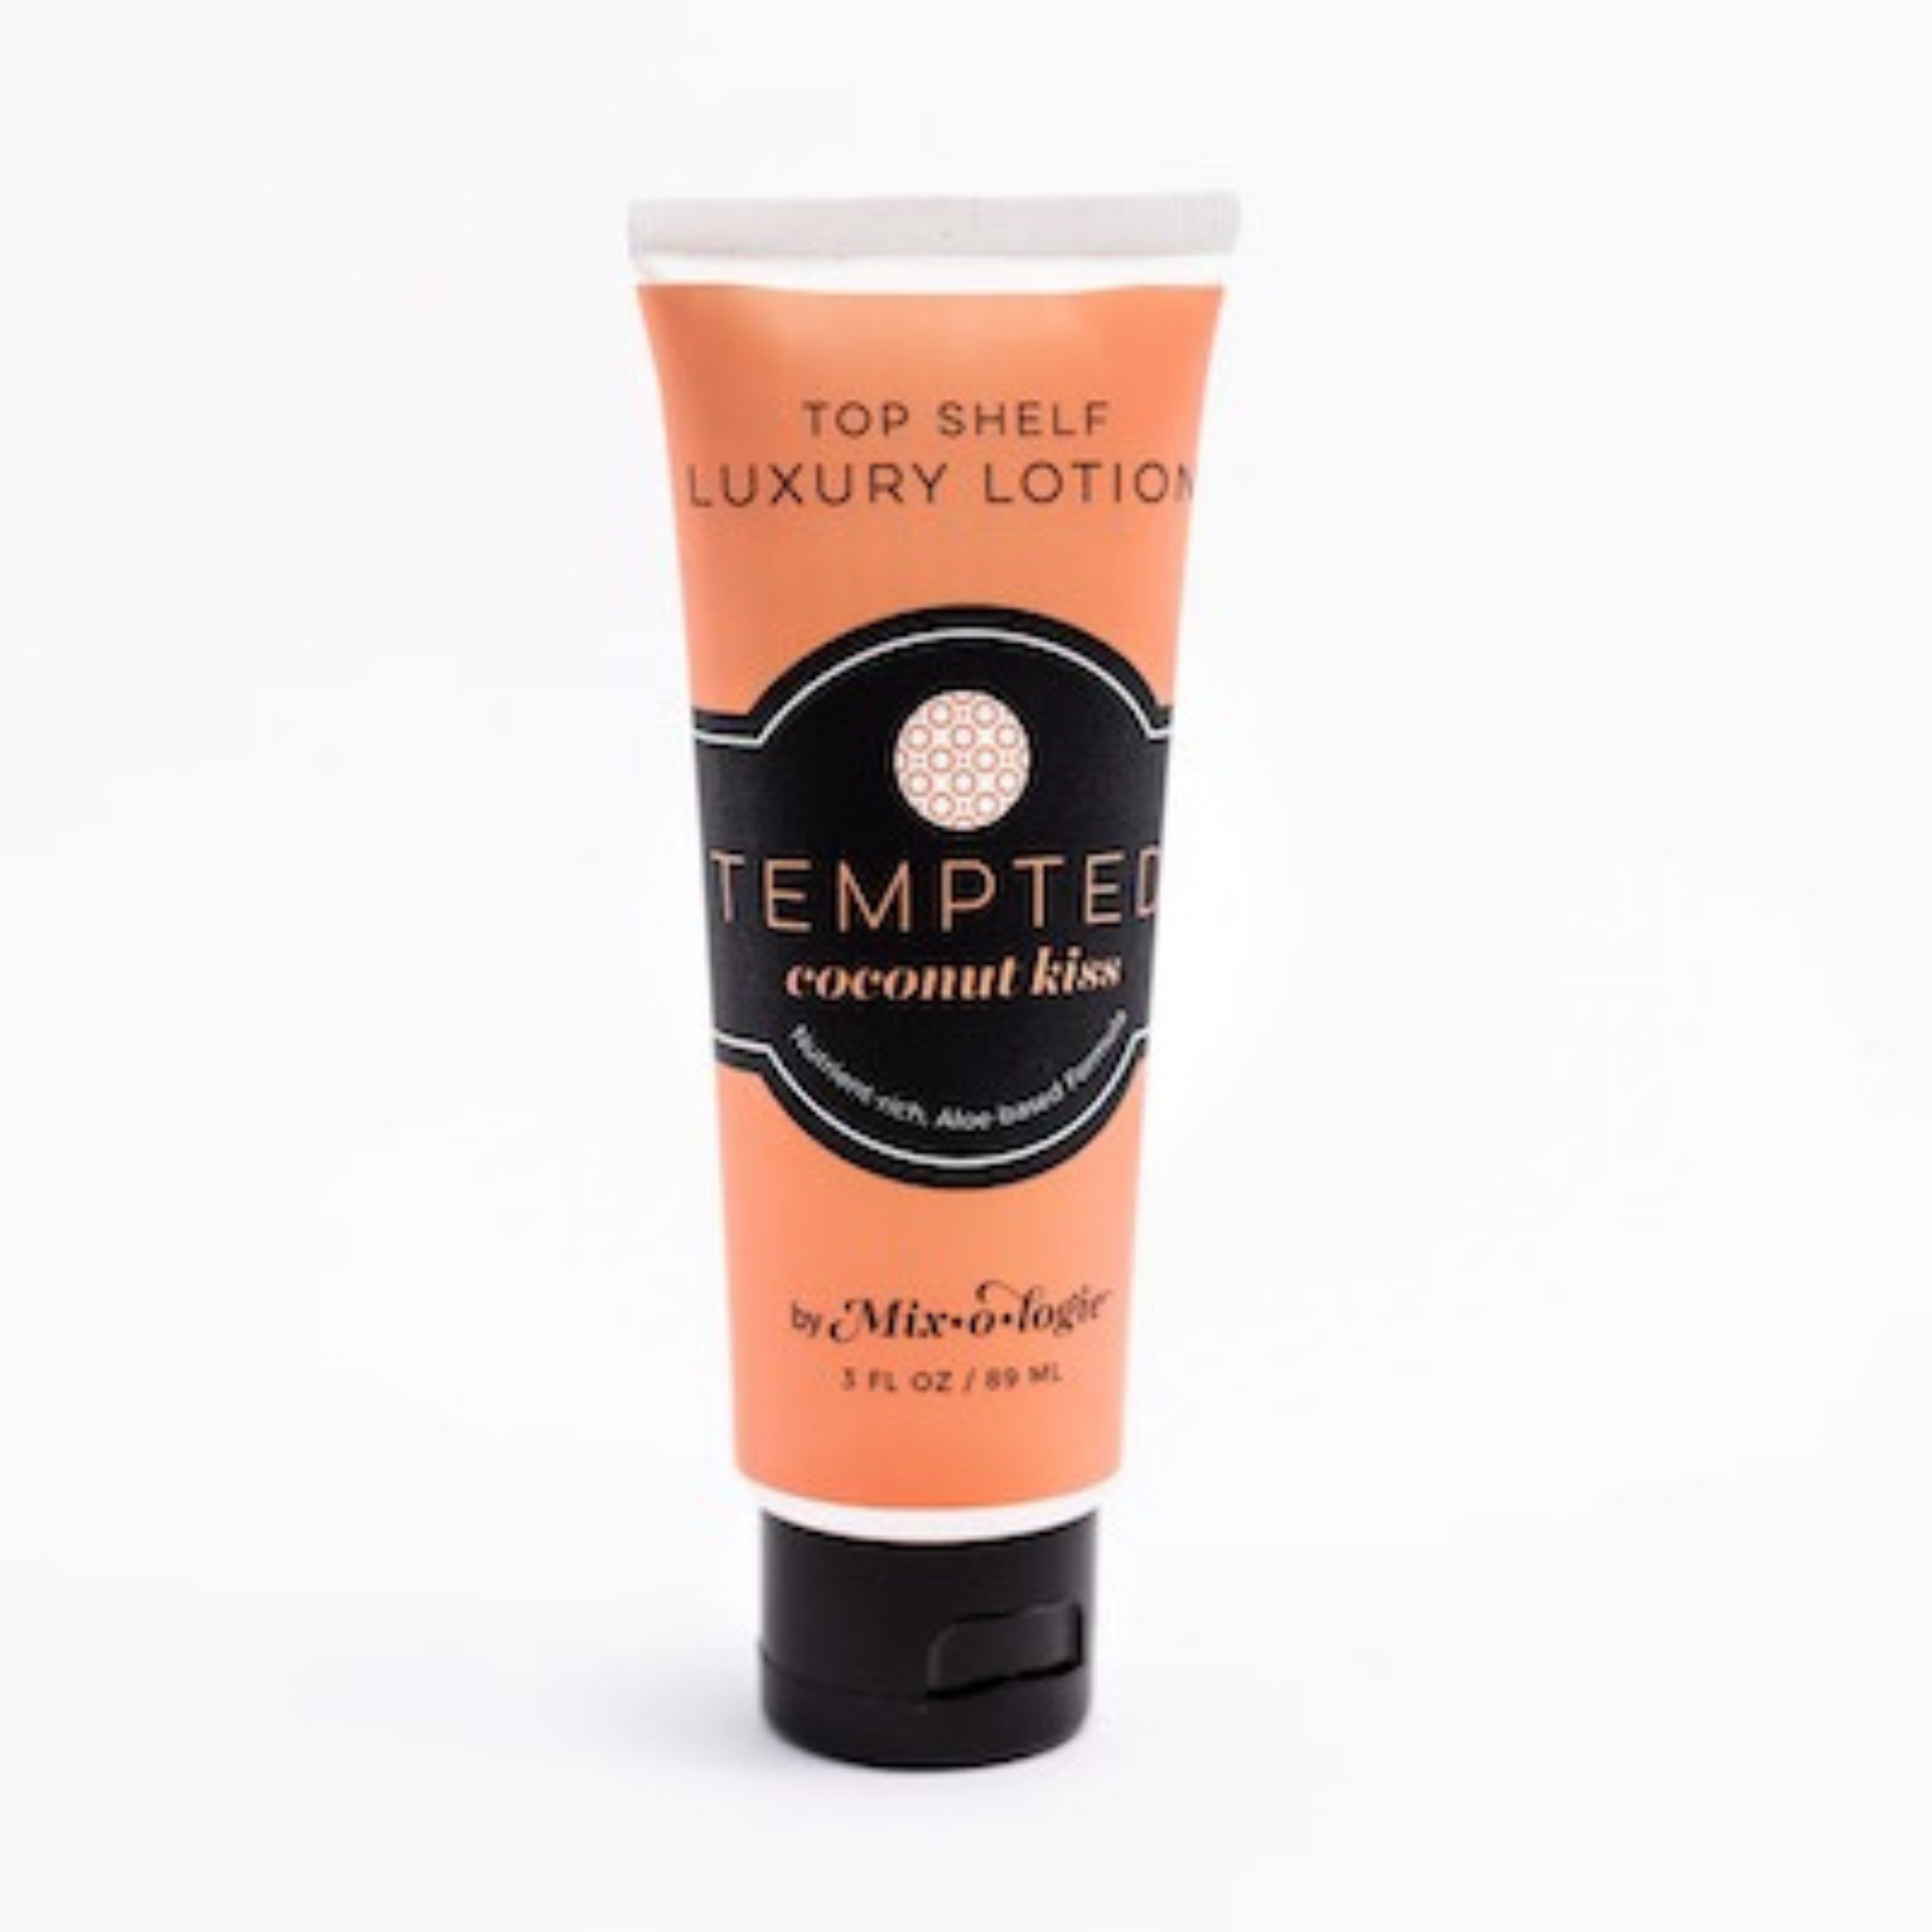 Top shelf luxury lotion in tempted